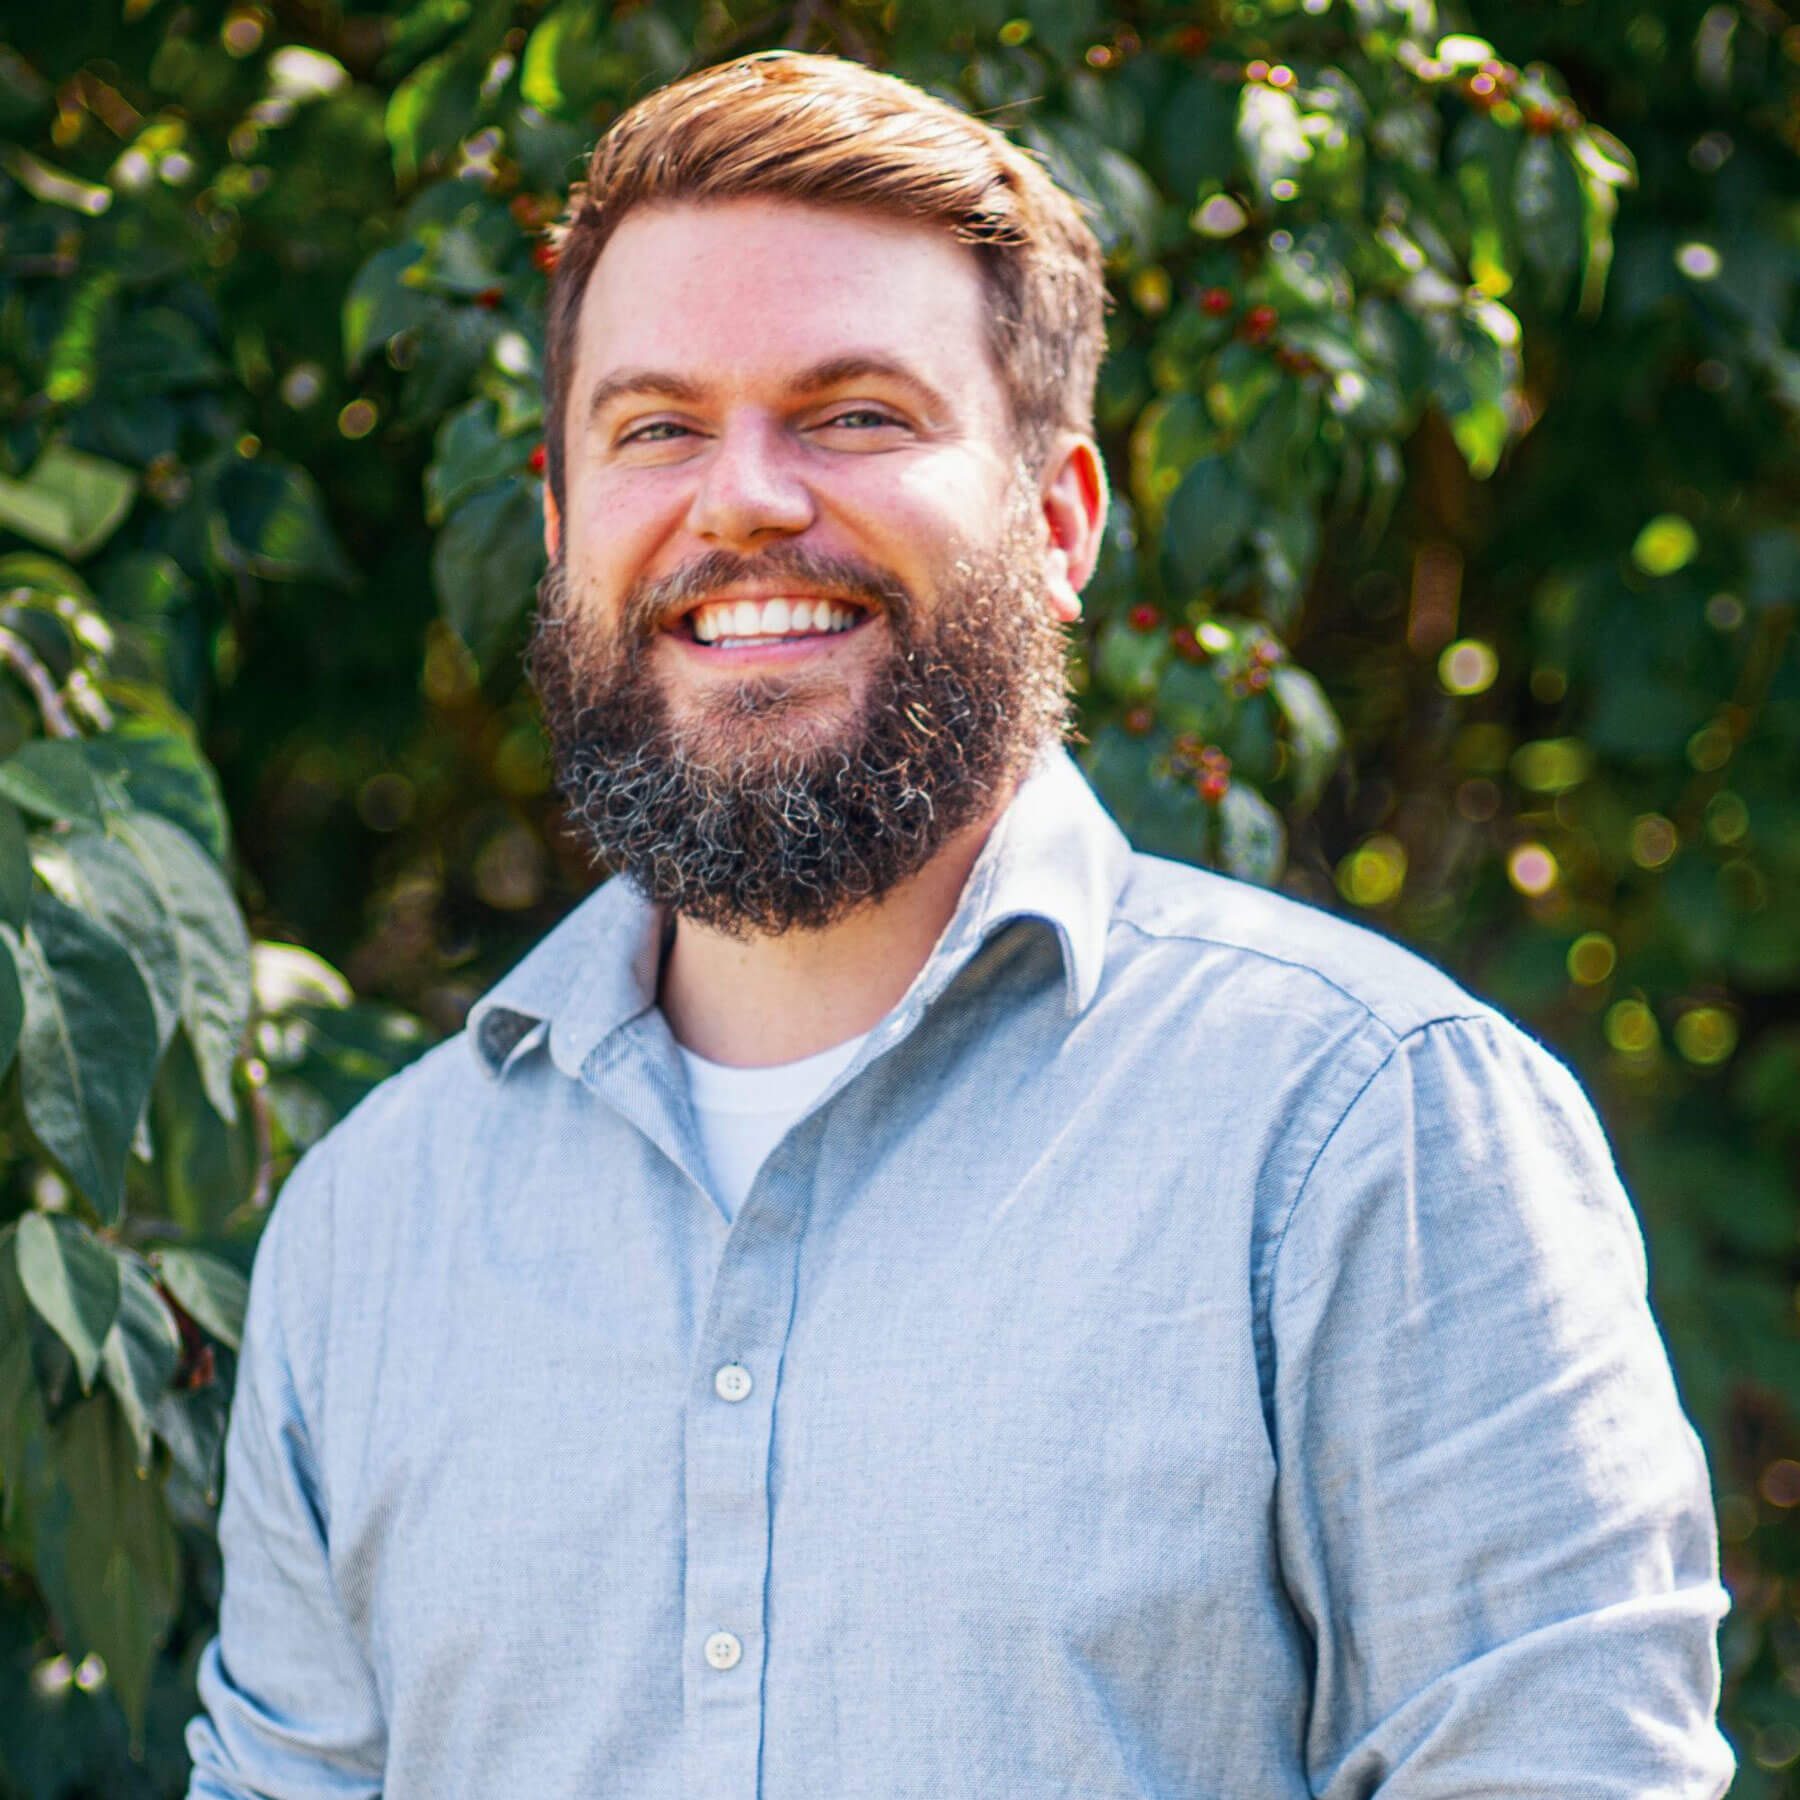 Bearded, brunette man smiling with trees in the background